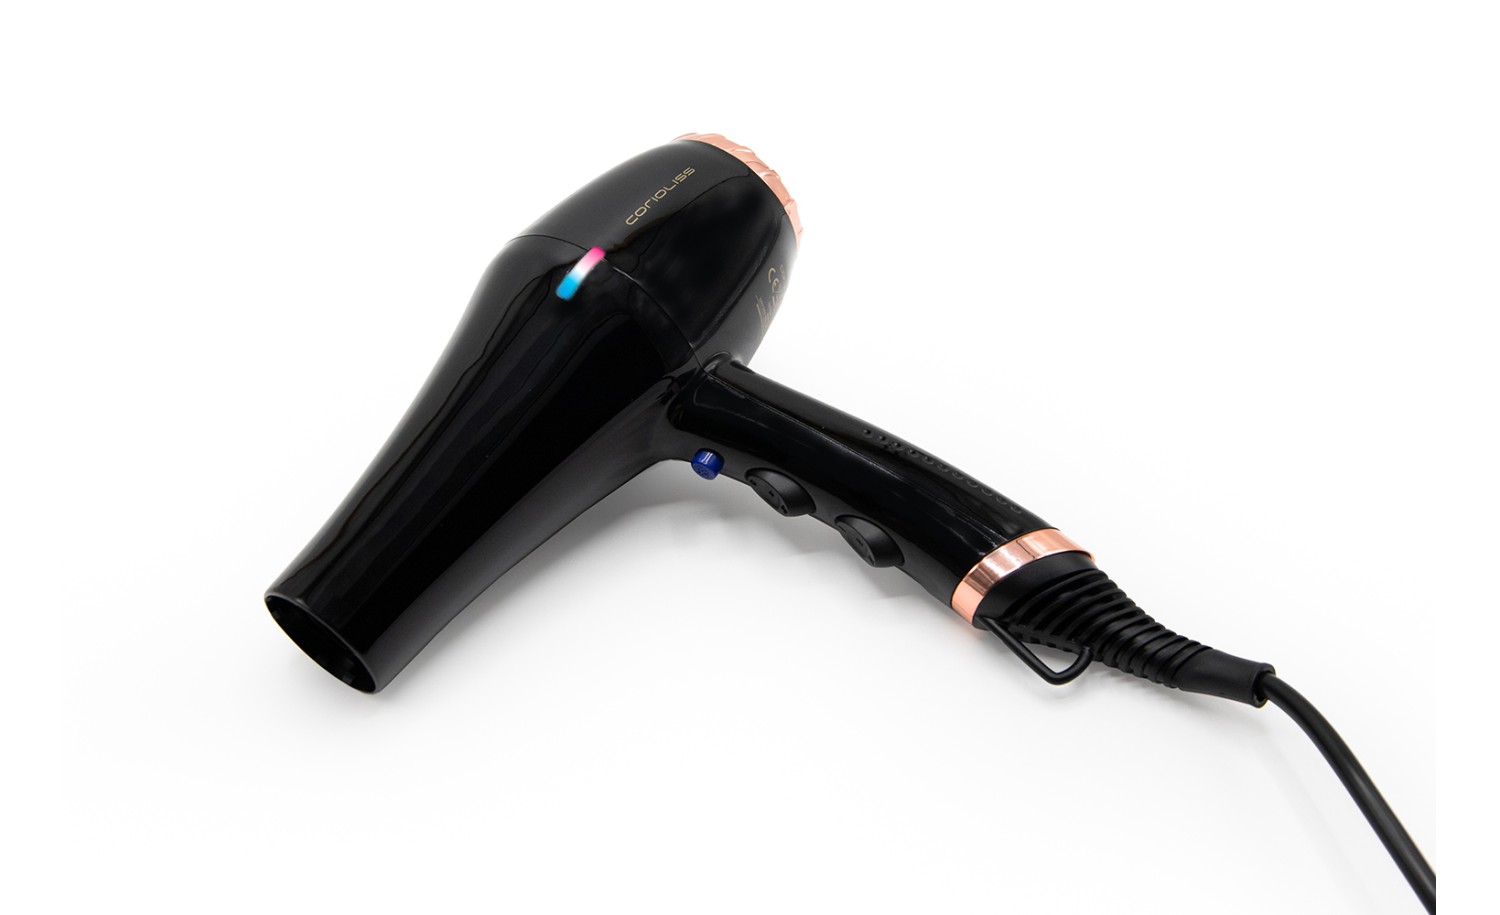 What Kind Of Energy Transformation Is Taking Place When A Hair Dryer Is Used?